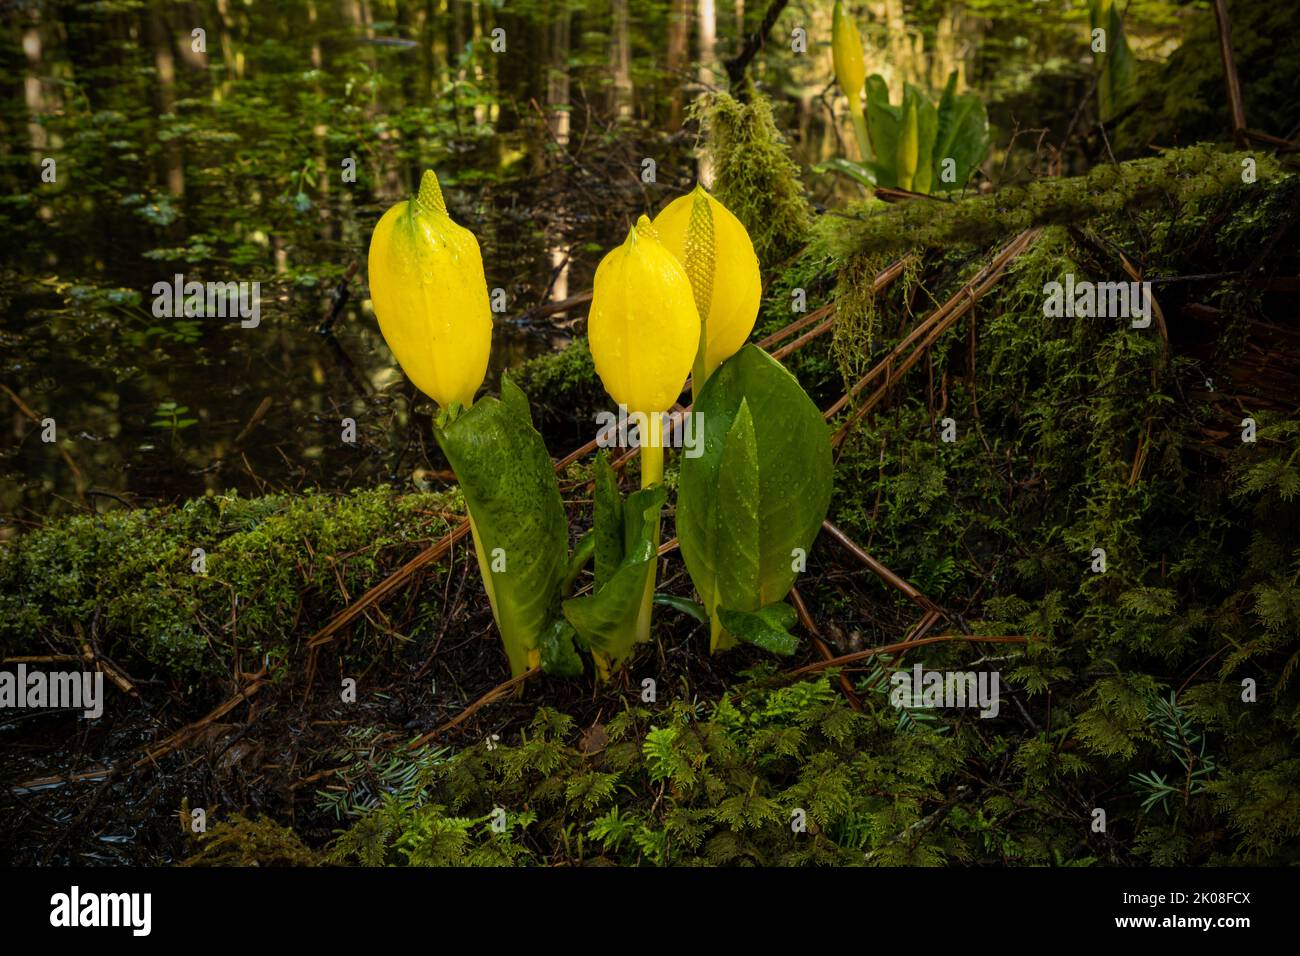 WA21996-00...WASHINGTON - Skunk cabbage blooming in a shallow pond along the Ancient Groves Trail in the Sol Duc Rain Forest area of Olympic National Stock Photo